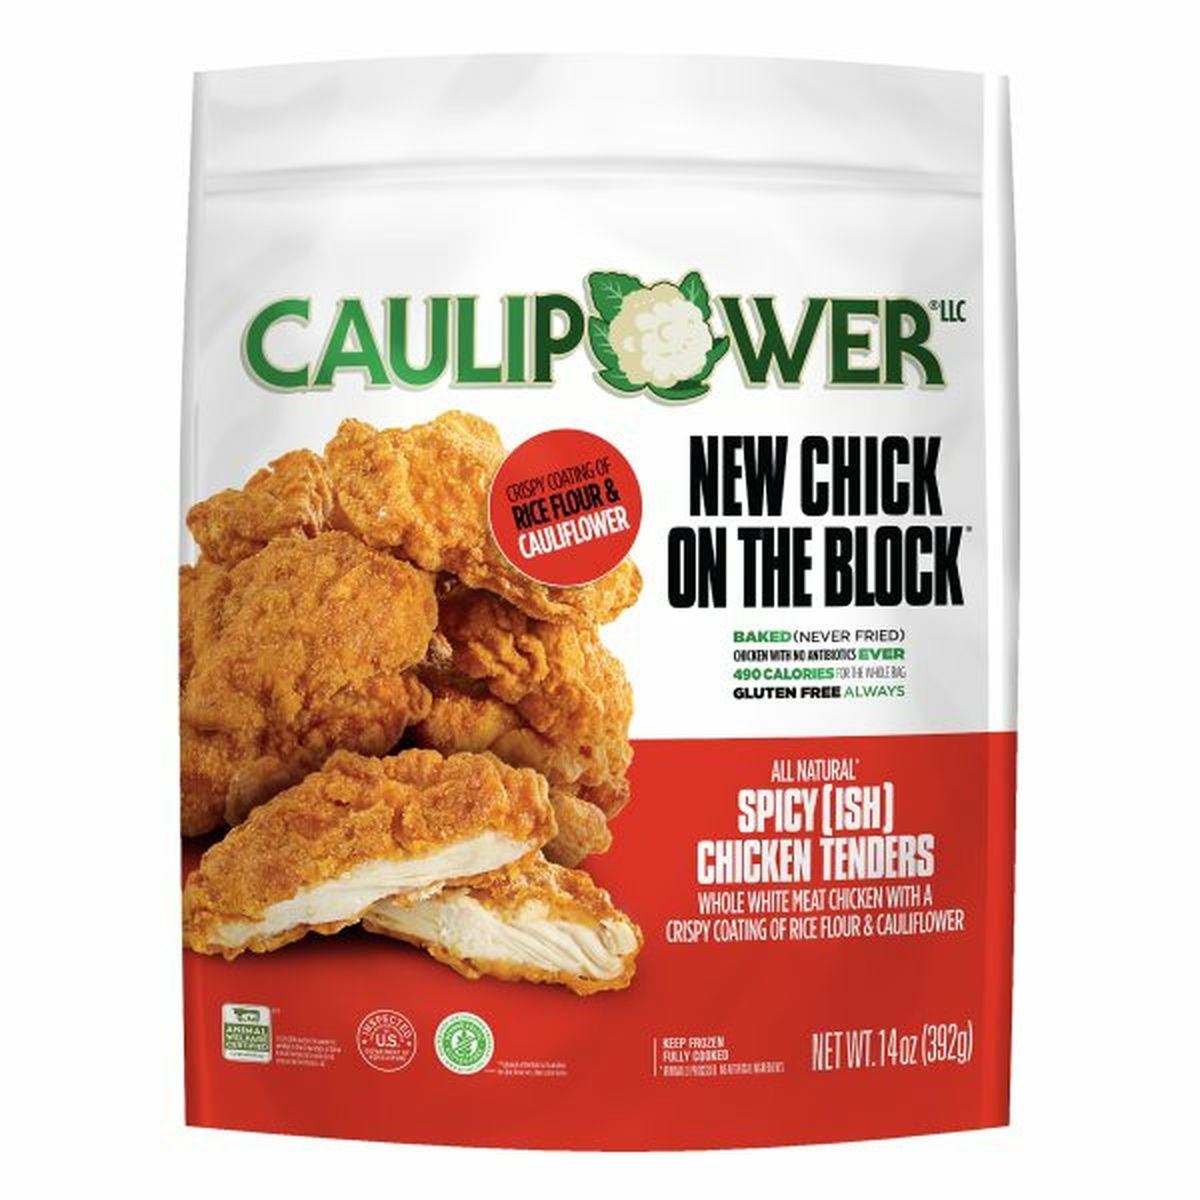 Calories in Caulipower New Chick on the Block Chicken Tenders, Spicy(Ish)